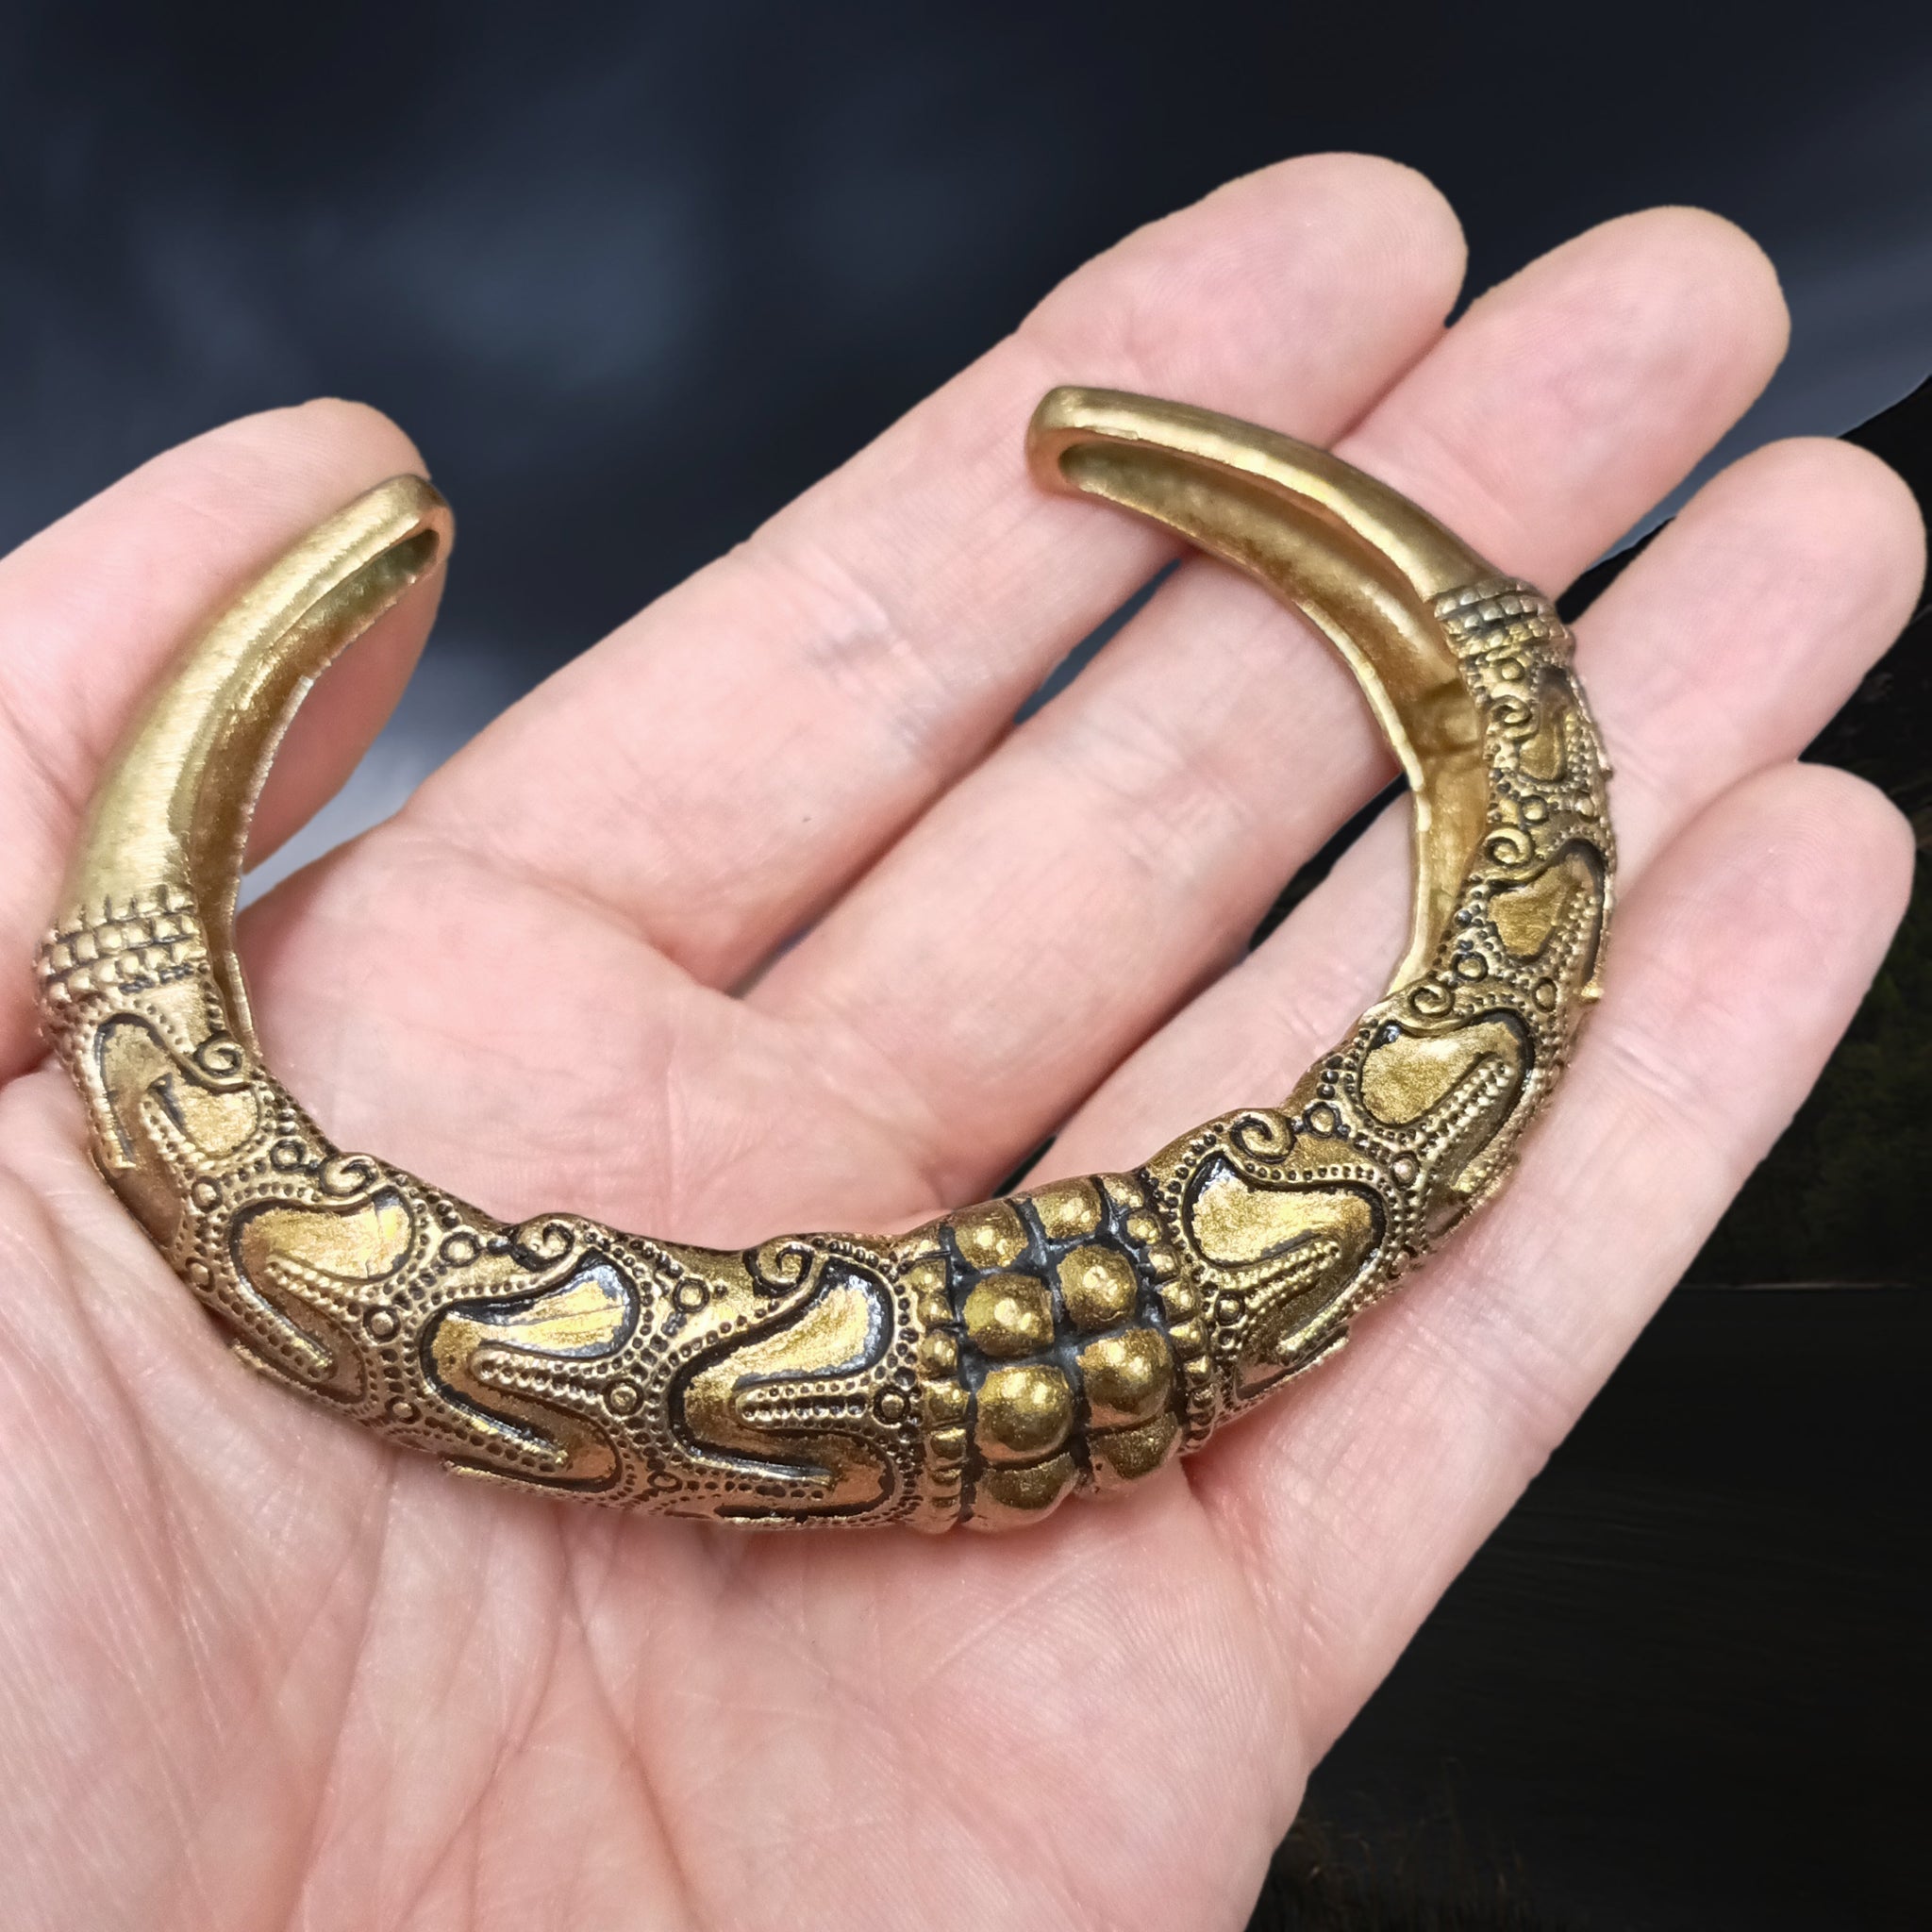 Bronze Replica Viking Bracelet / Arm Ring from Orupgard on Hand - Above Angle View